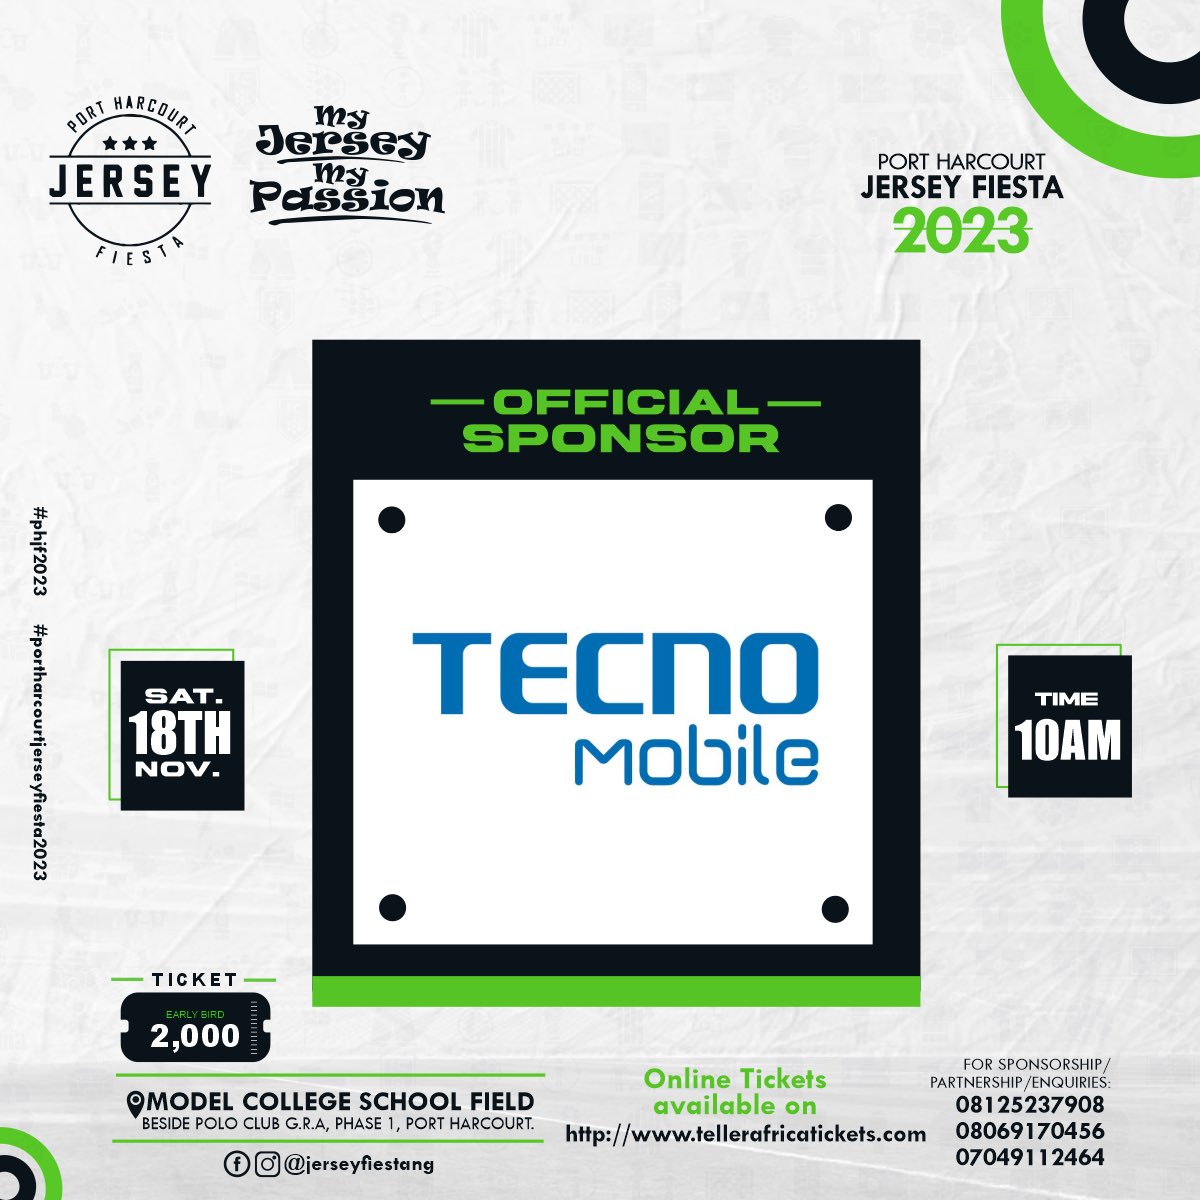 You don’t want to miss this event. Our first official sponsor. TECNO MOBILE !! Imagine the gifts that would be won 🥇 #phjerseyfiesta #PJF #portharcourt #TECNO #Tecnomobile